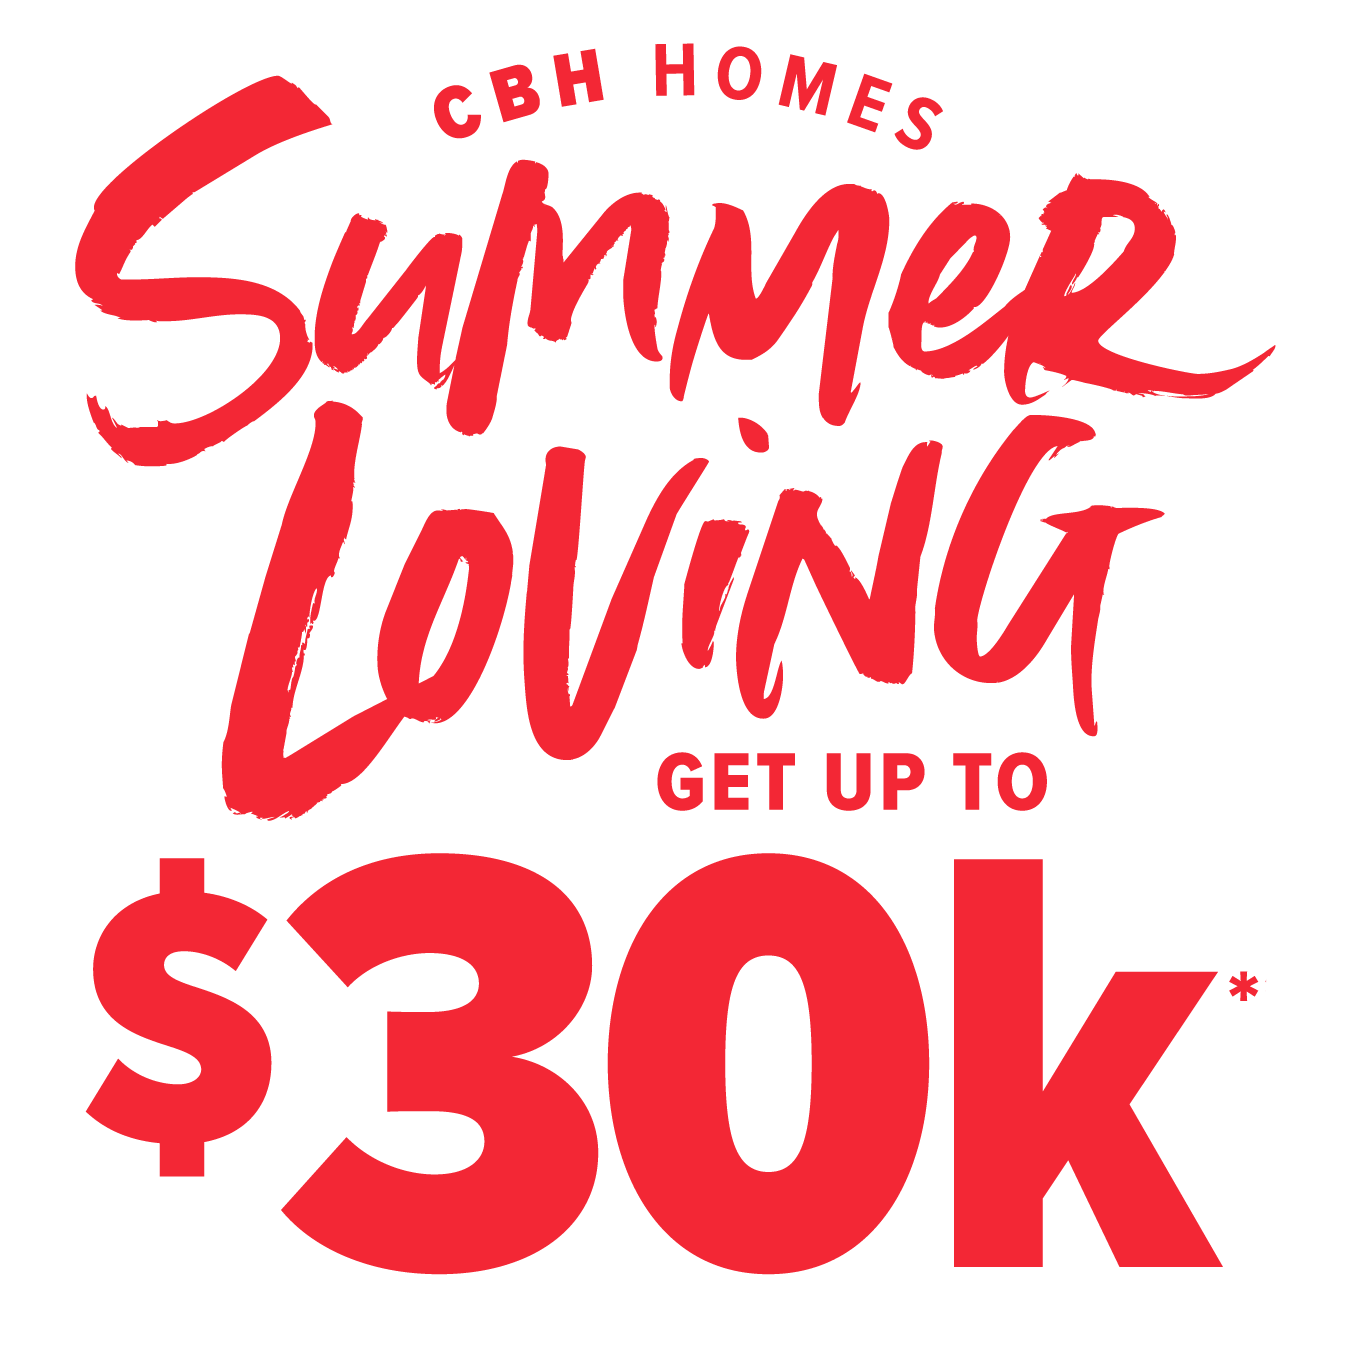 CBH Homes Summer Loving Get Up to $30K*